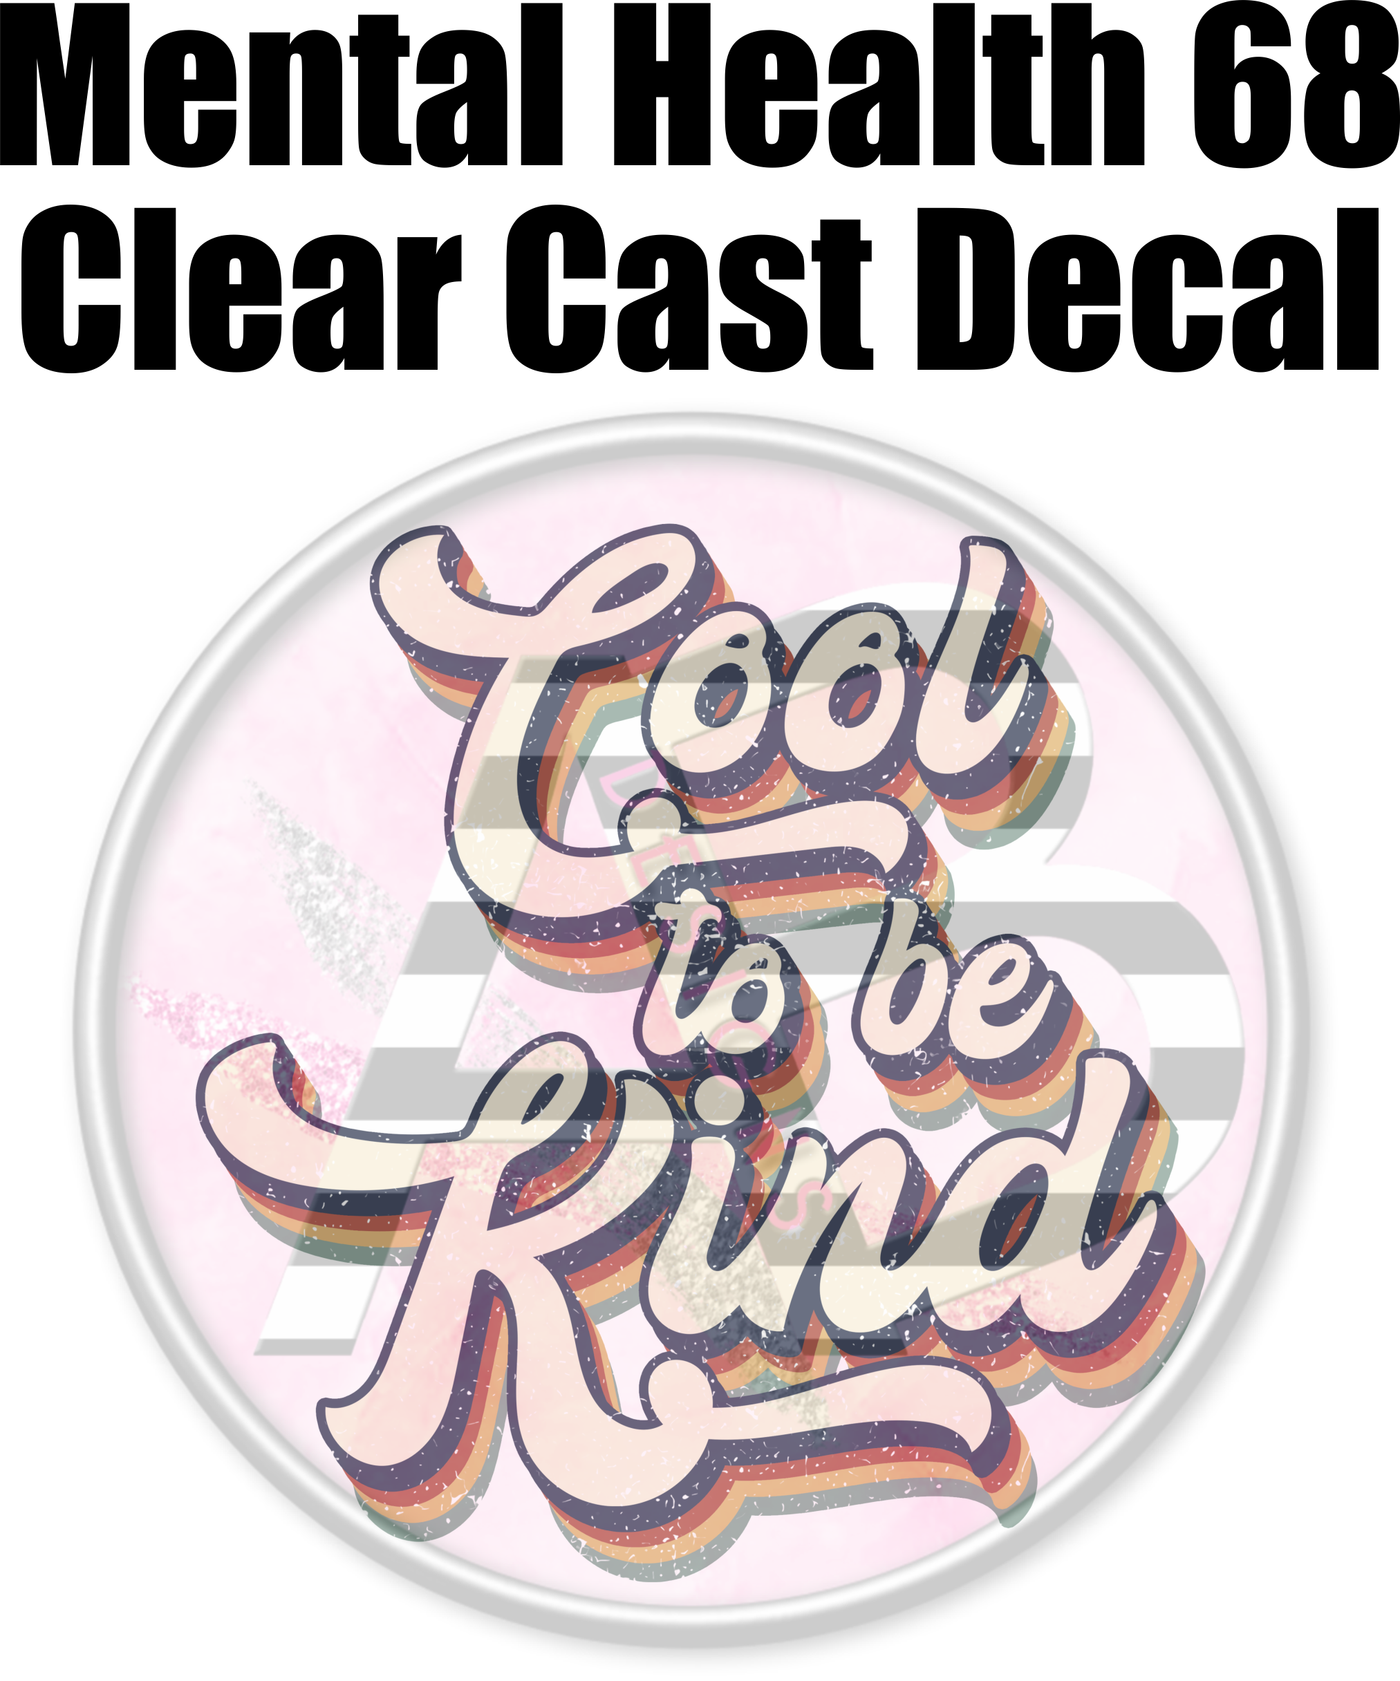 Mental Health 68 - Clear Cast Decal-452